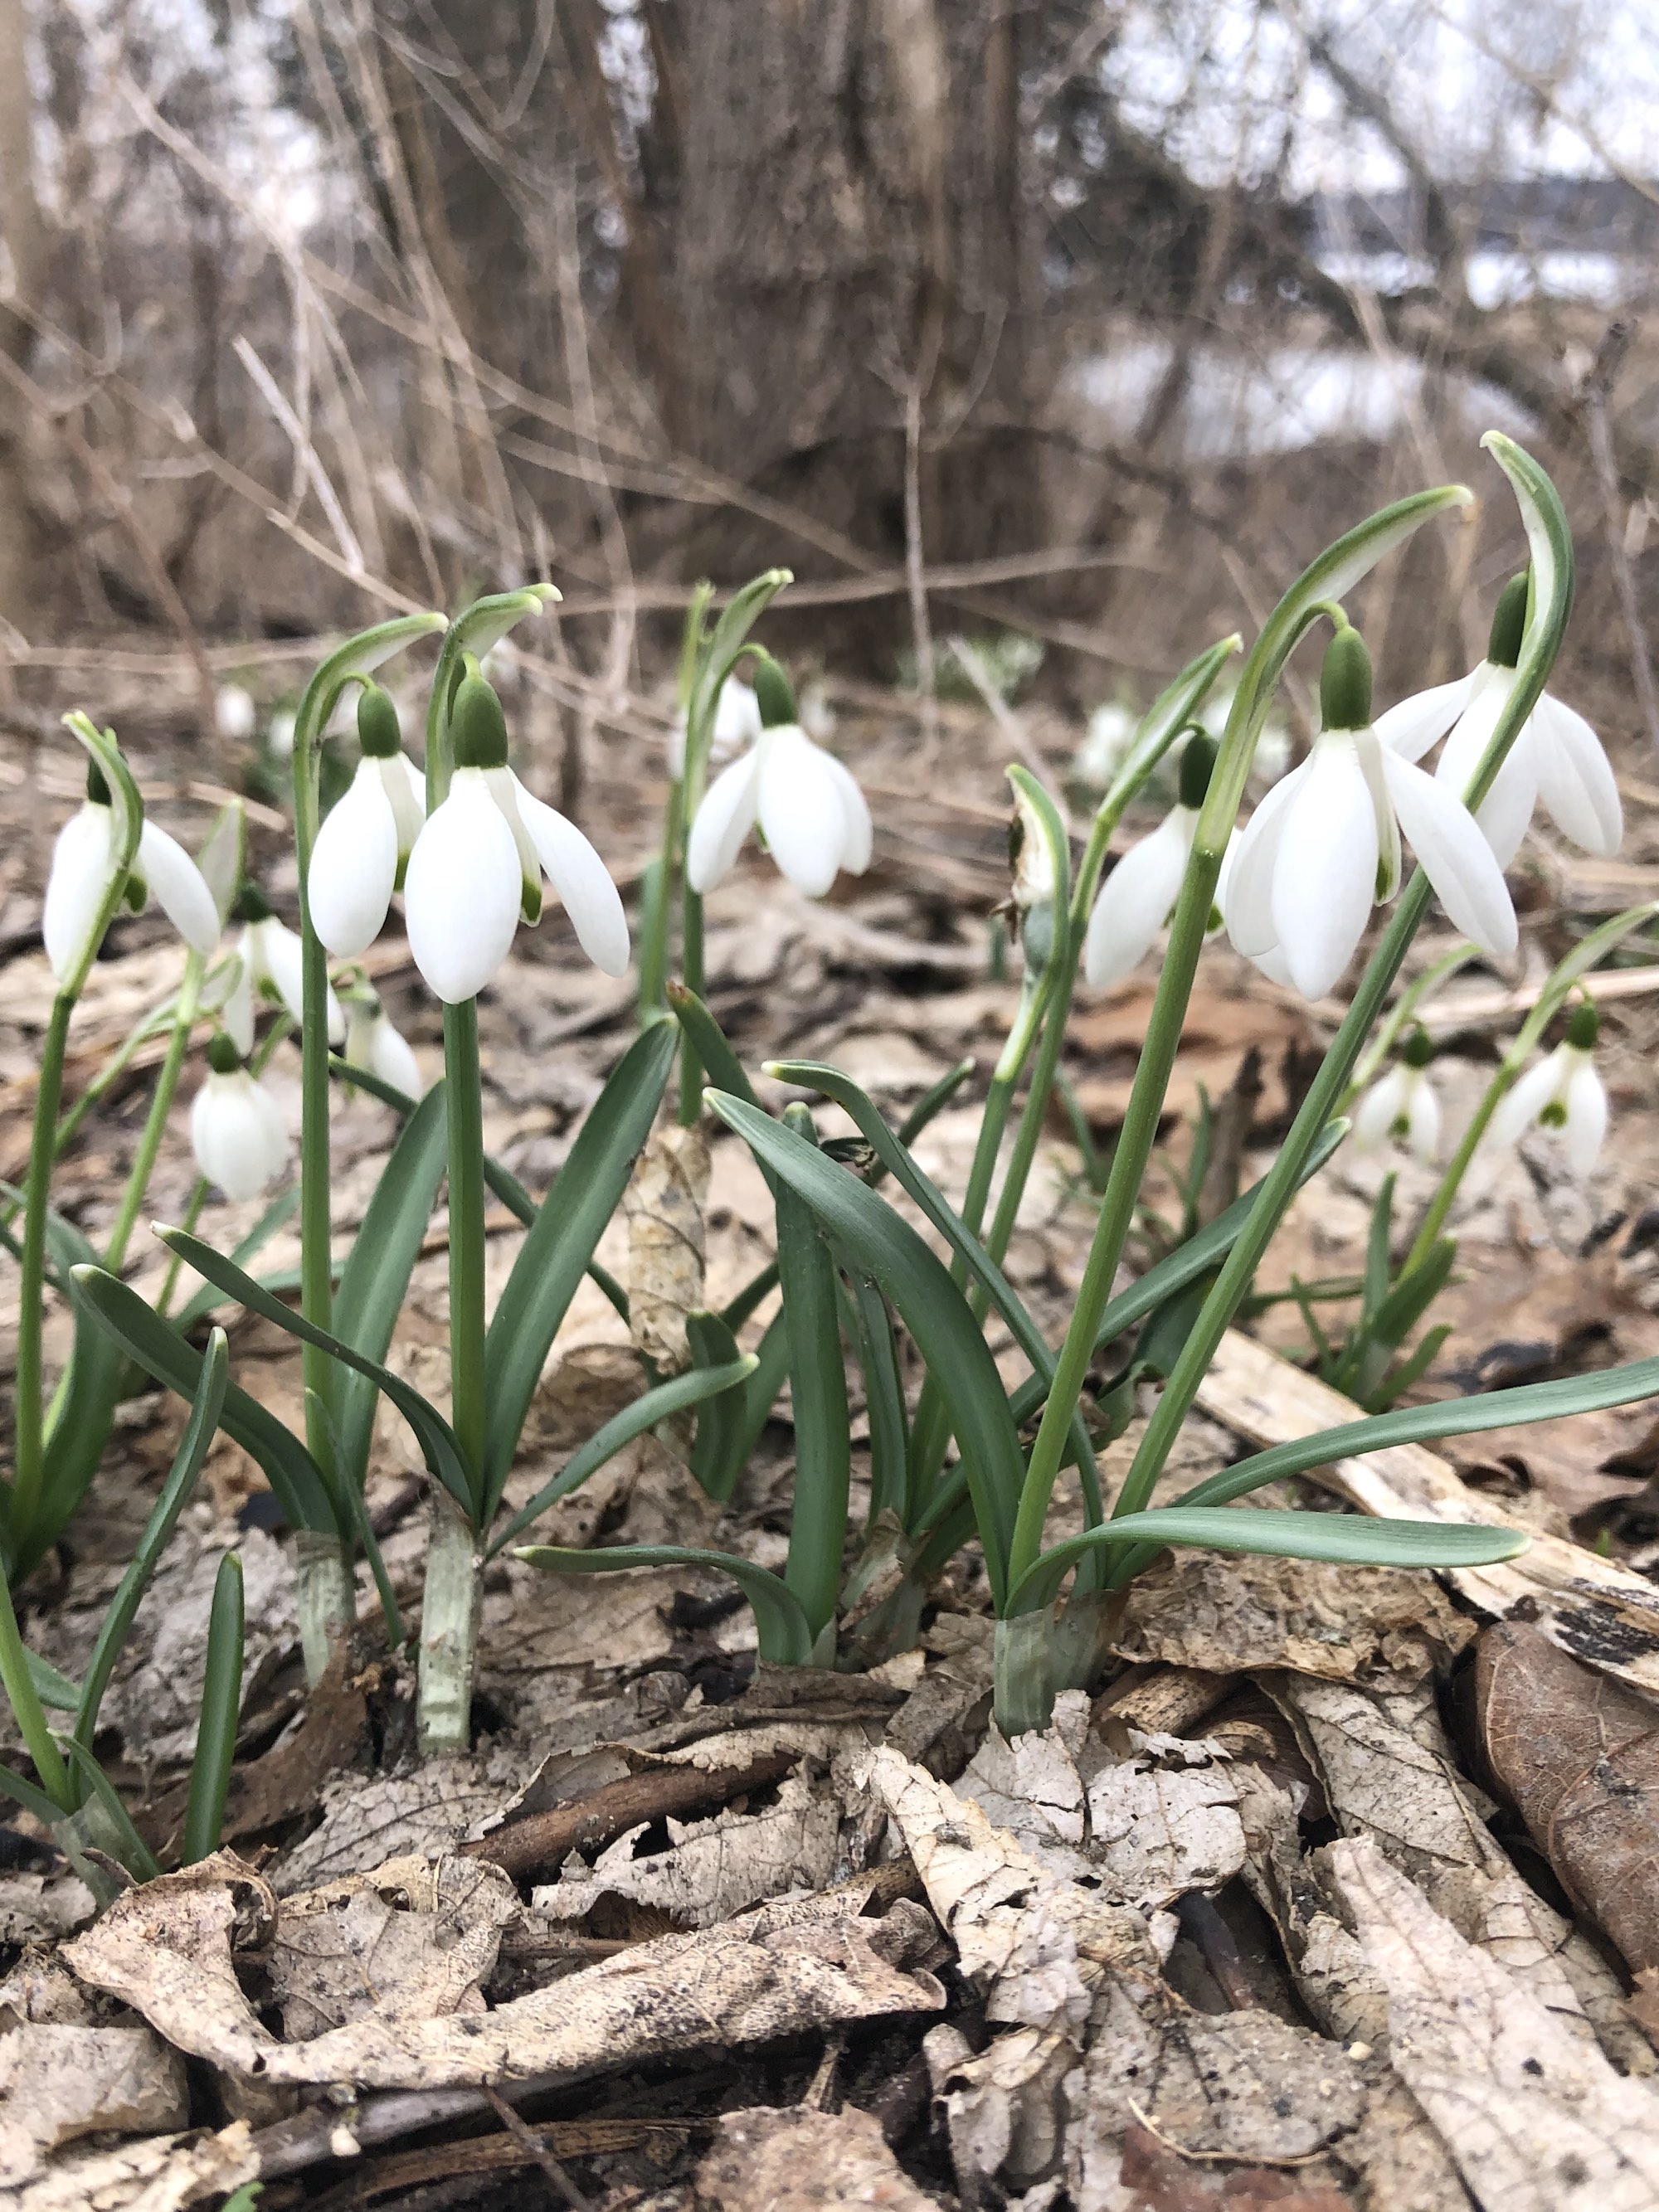 Snowdrops emerging in Madison Wisconsin along Arbor Drive on March 10, 2021.